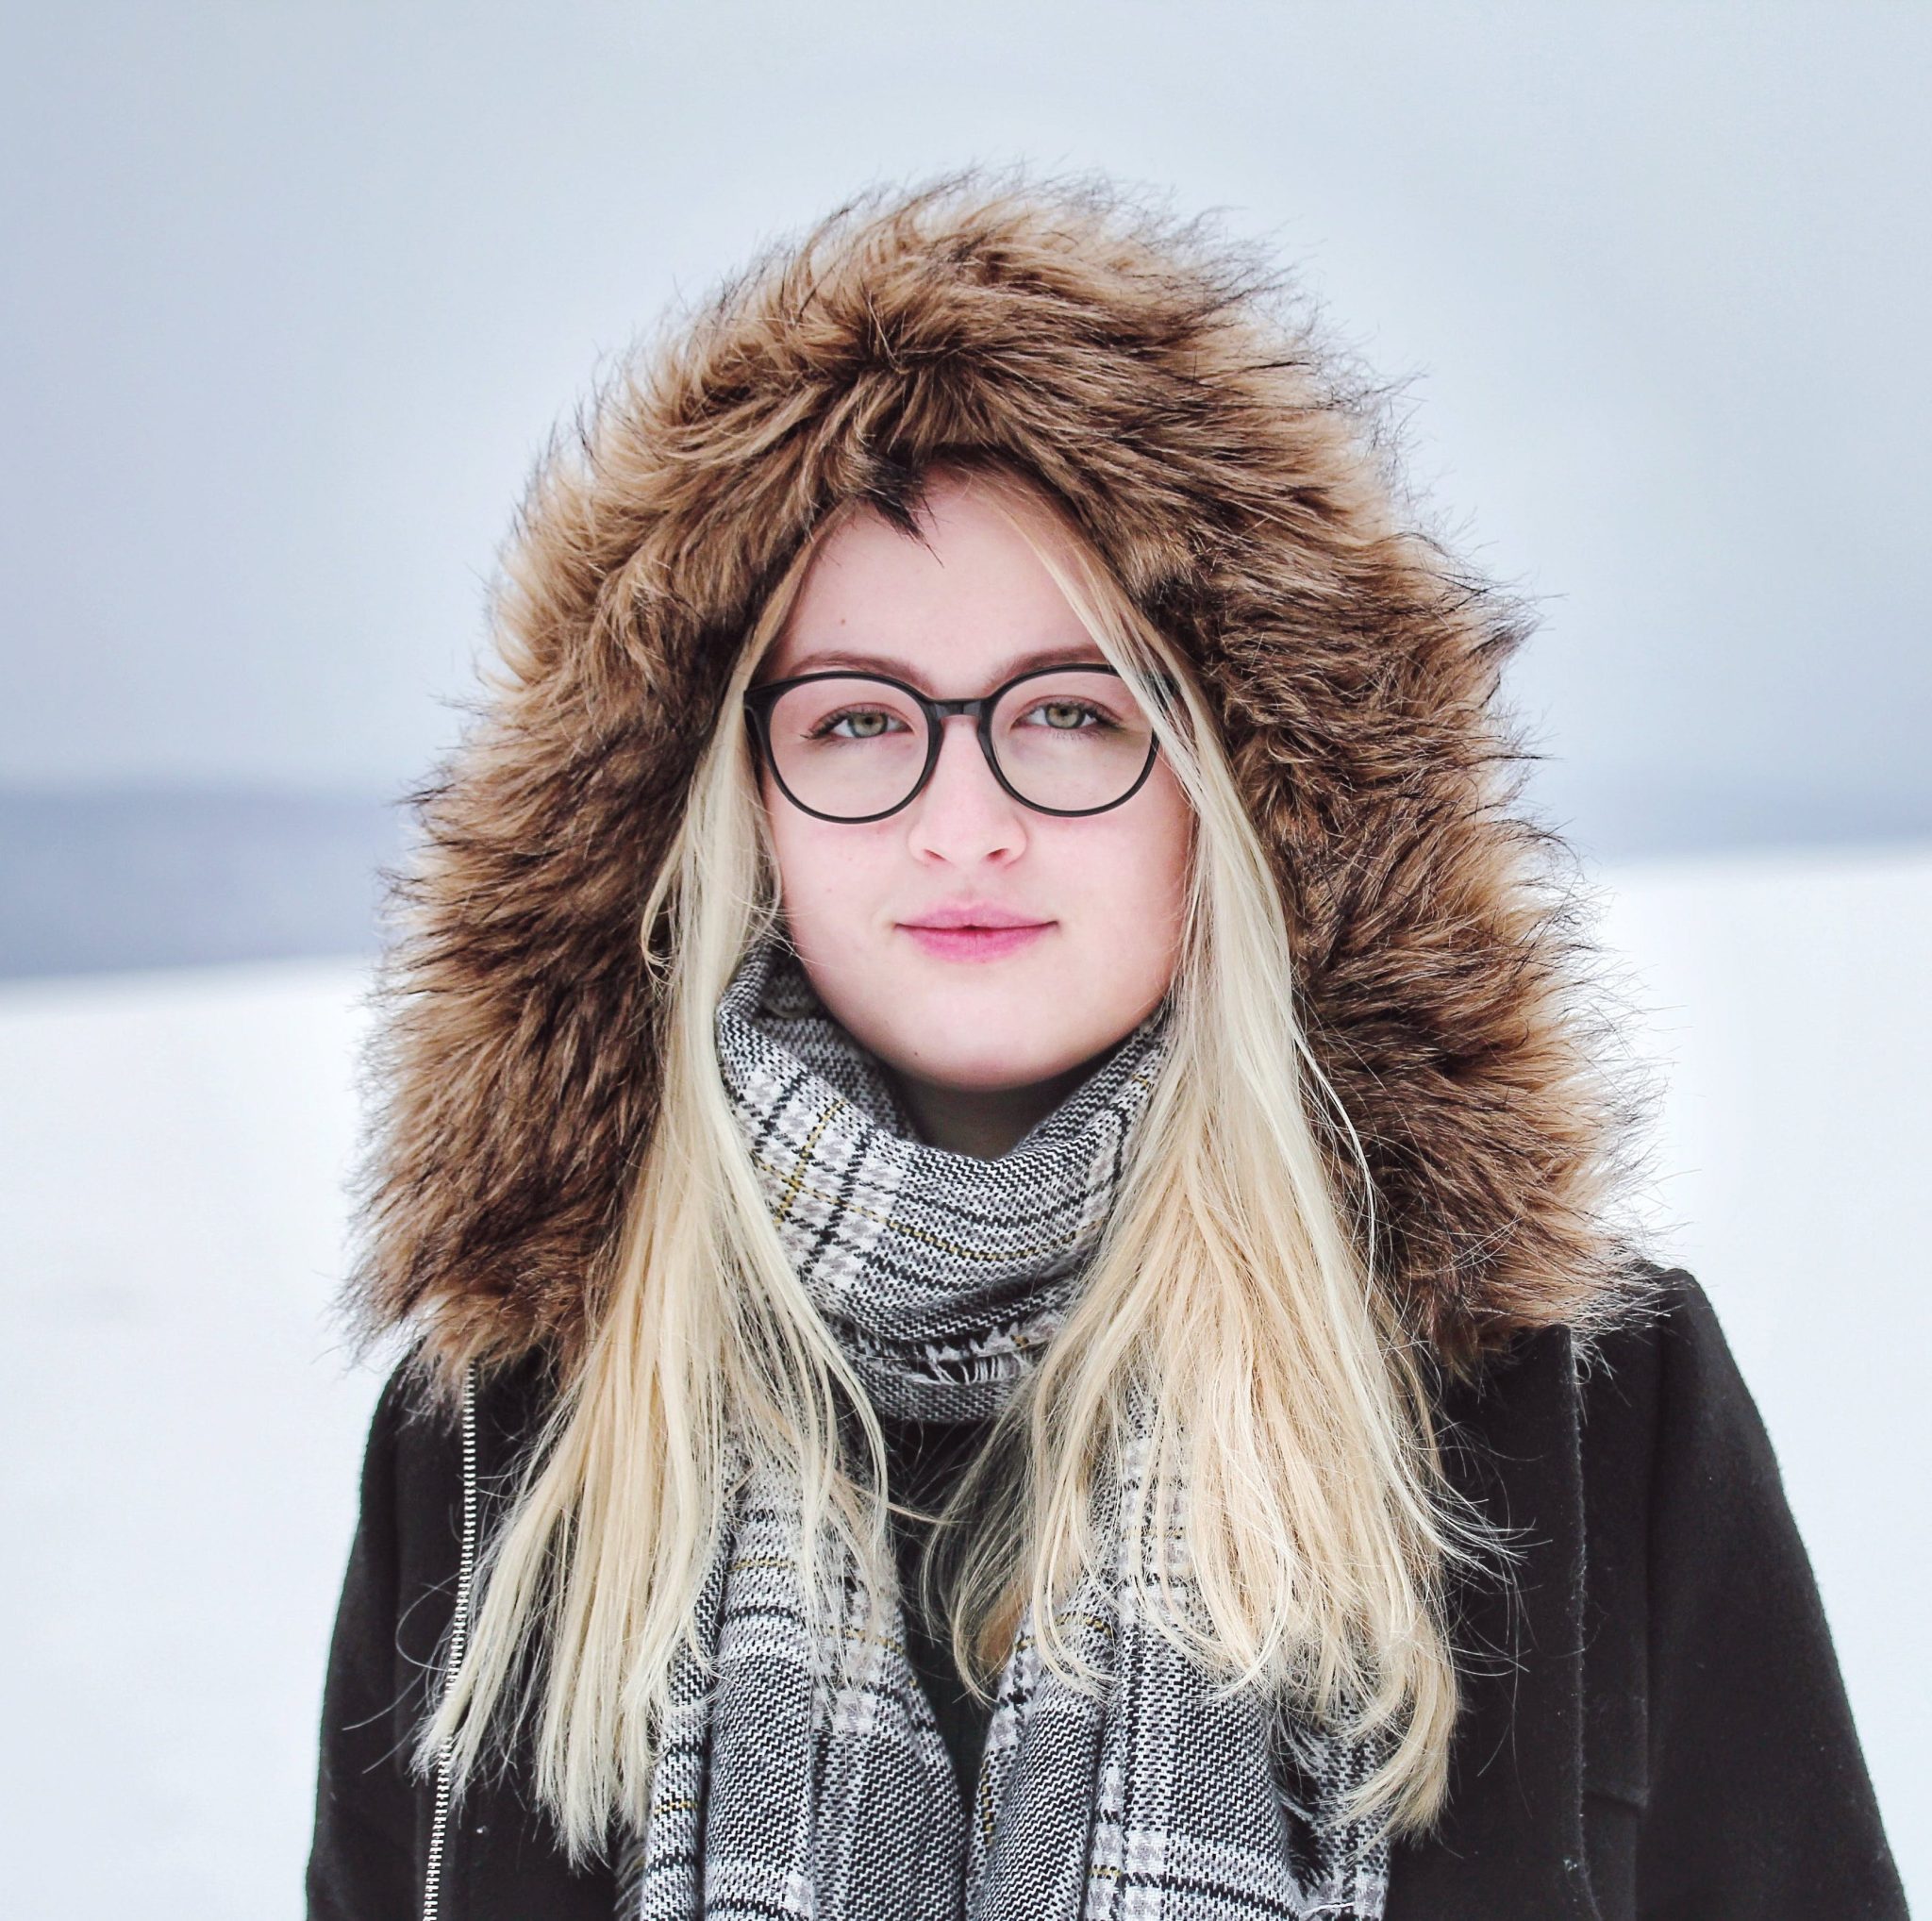 Skin Care Tips for Winter Months